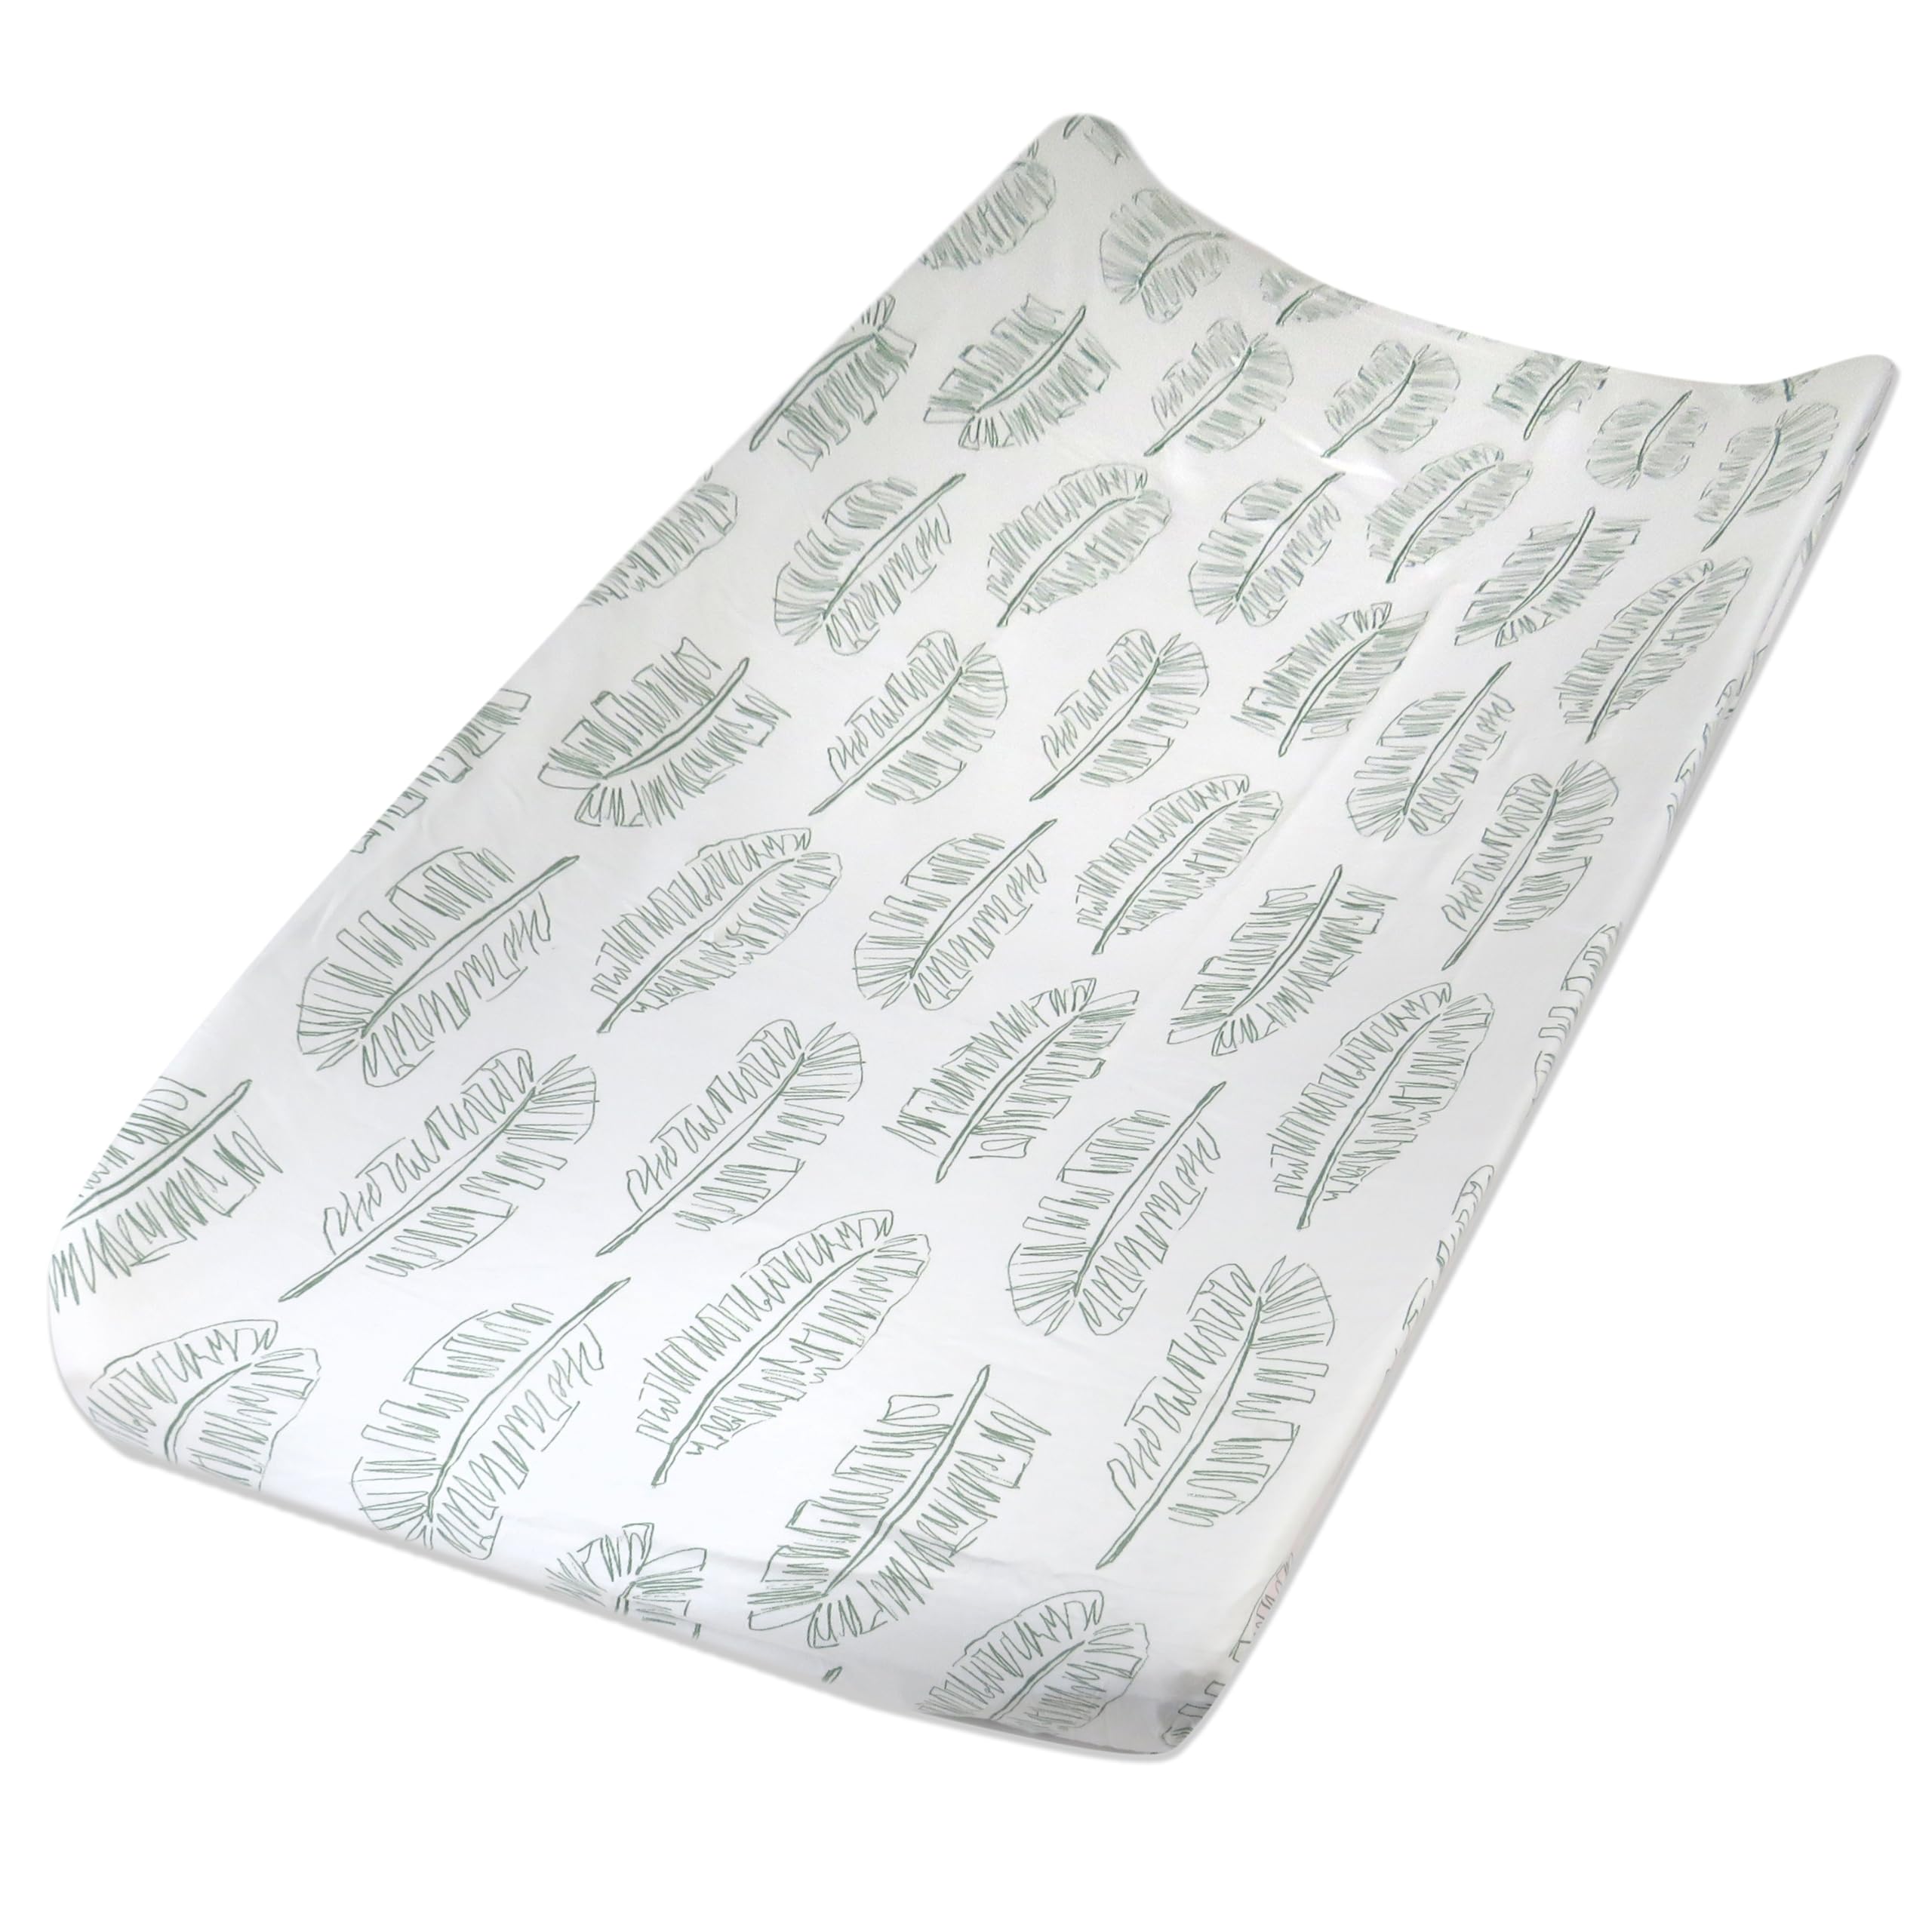 HonestBaby Organic Cotton Changing Pad Cover, Jumbo Leaf Sage, One Size